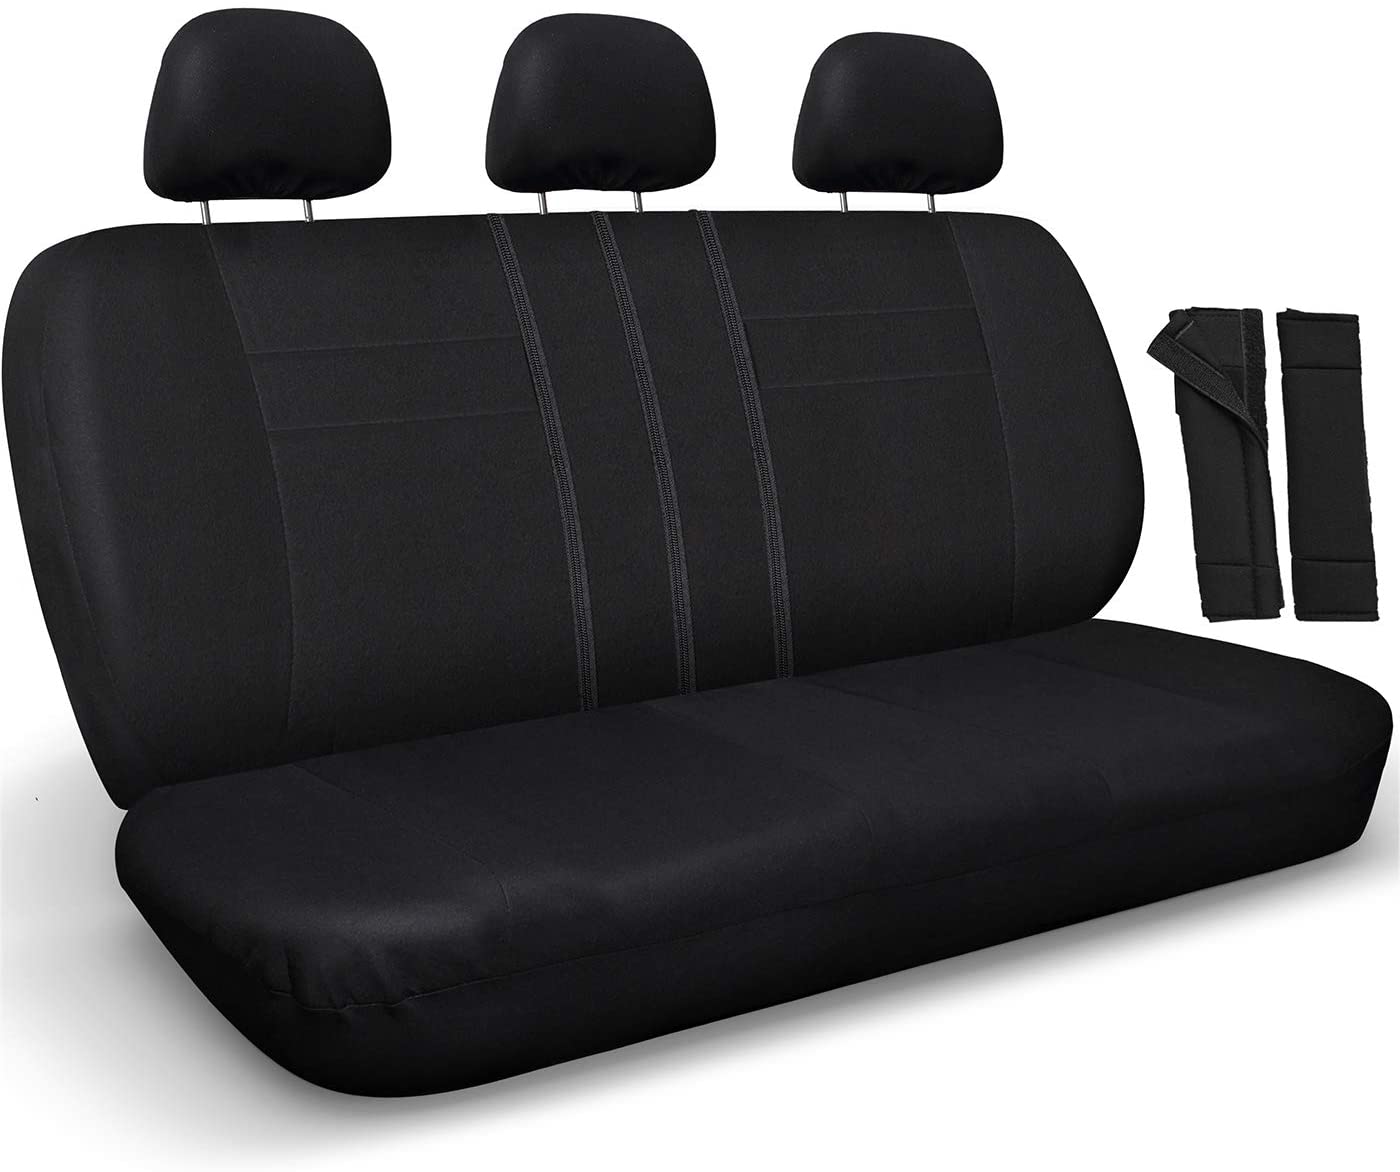 OxGord Back Seat Cover - Poly Cloth Solid Black Rear Bench Universal Fit Car, Truck, SUV, Van - 8 Piece